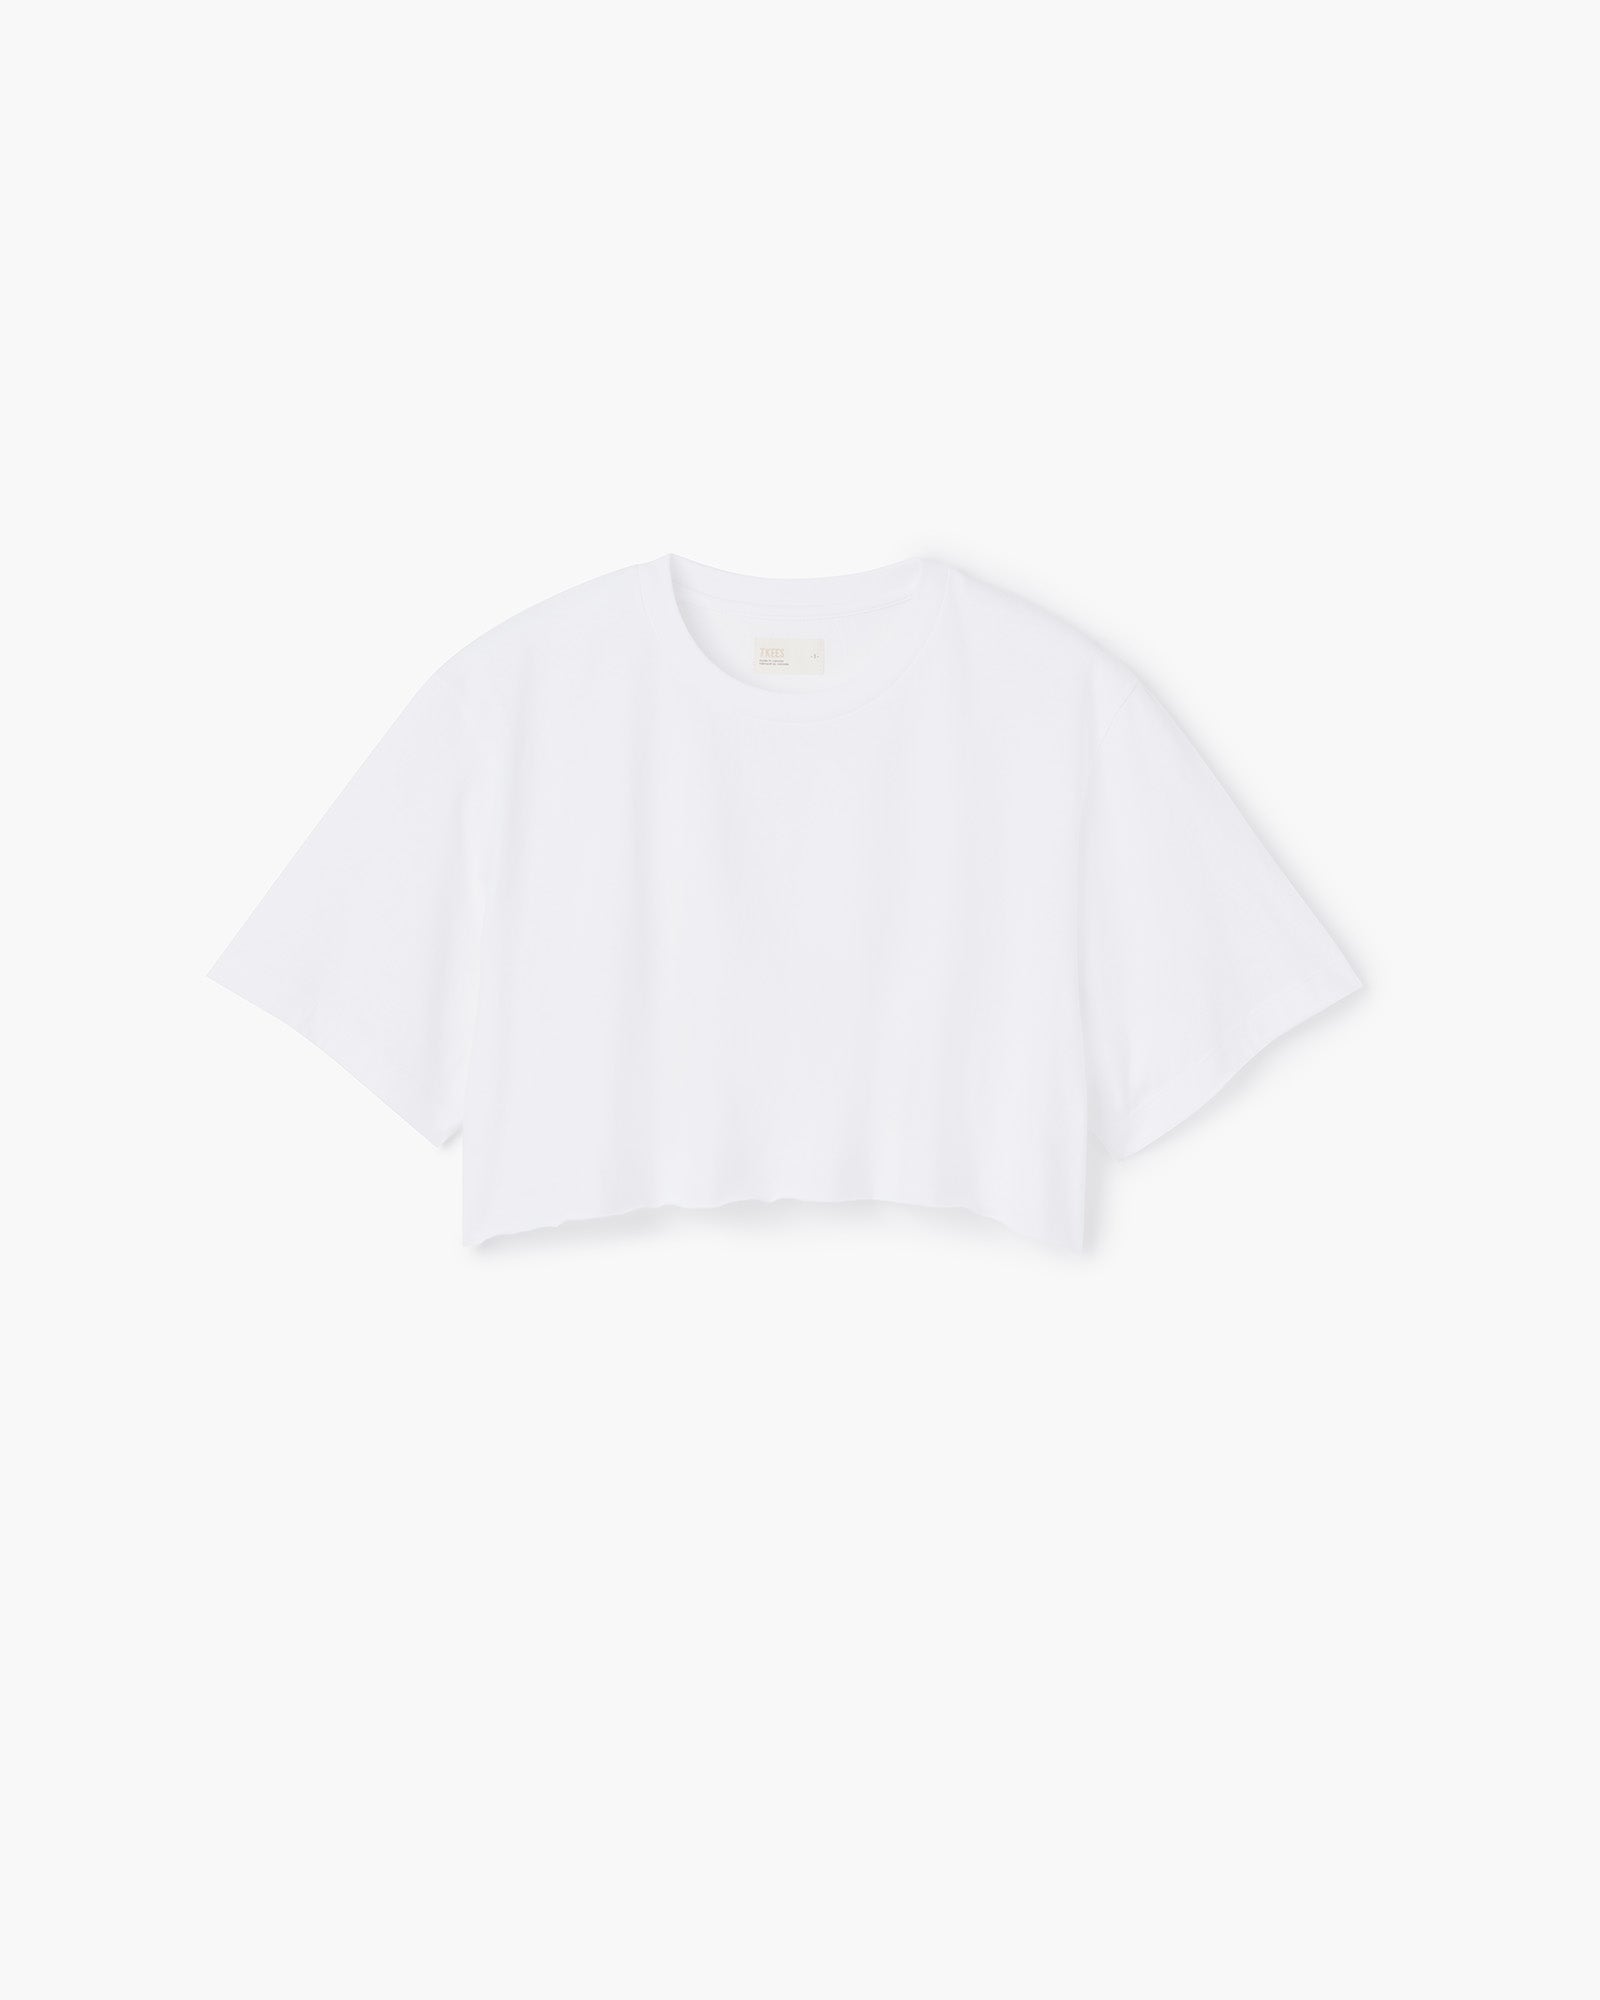 Cropped Tee in White – TKEES | Clothing Women\'s | T-Shirts